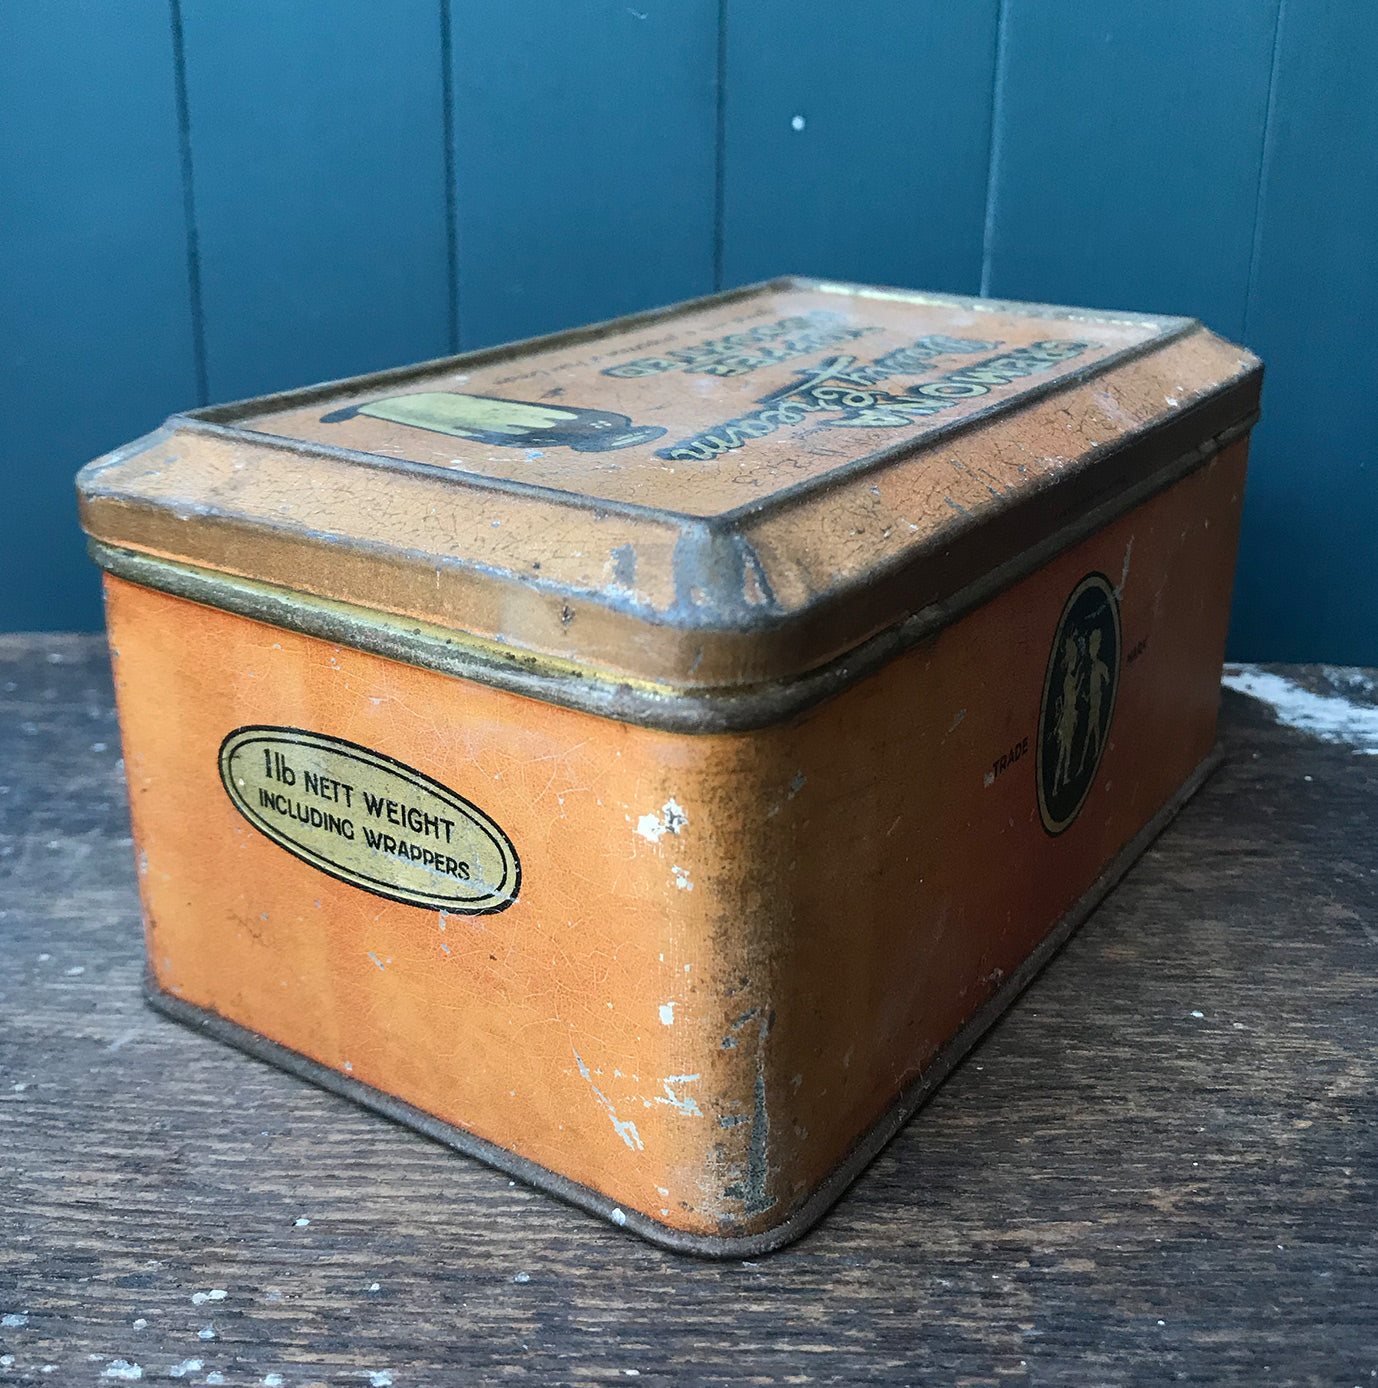 Nicely aged Vintage Cremona Toffee Tin with a great patina to the print - SHOP NOW - www.intovintage.co.uk